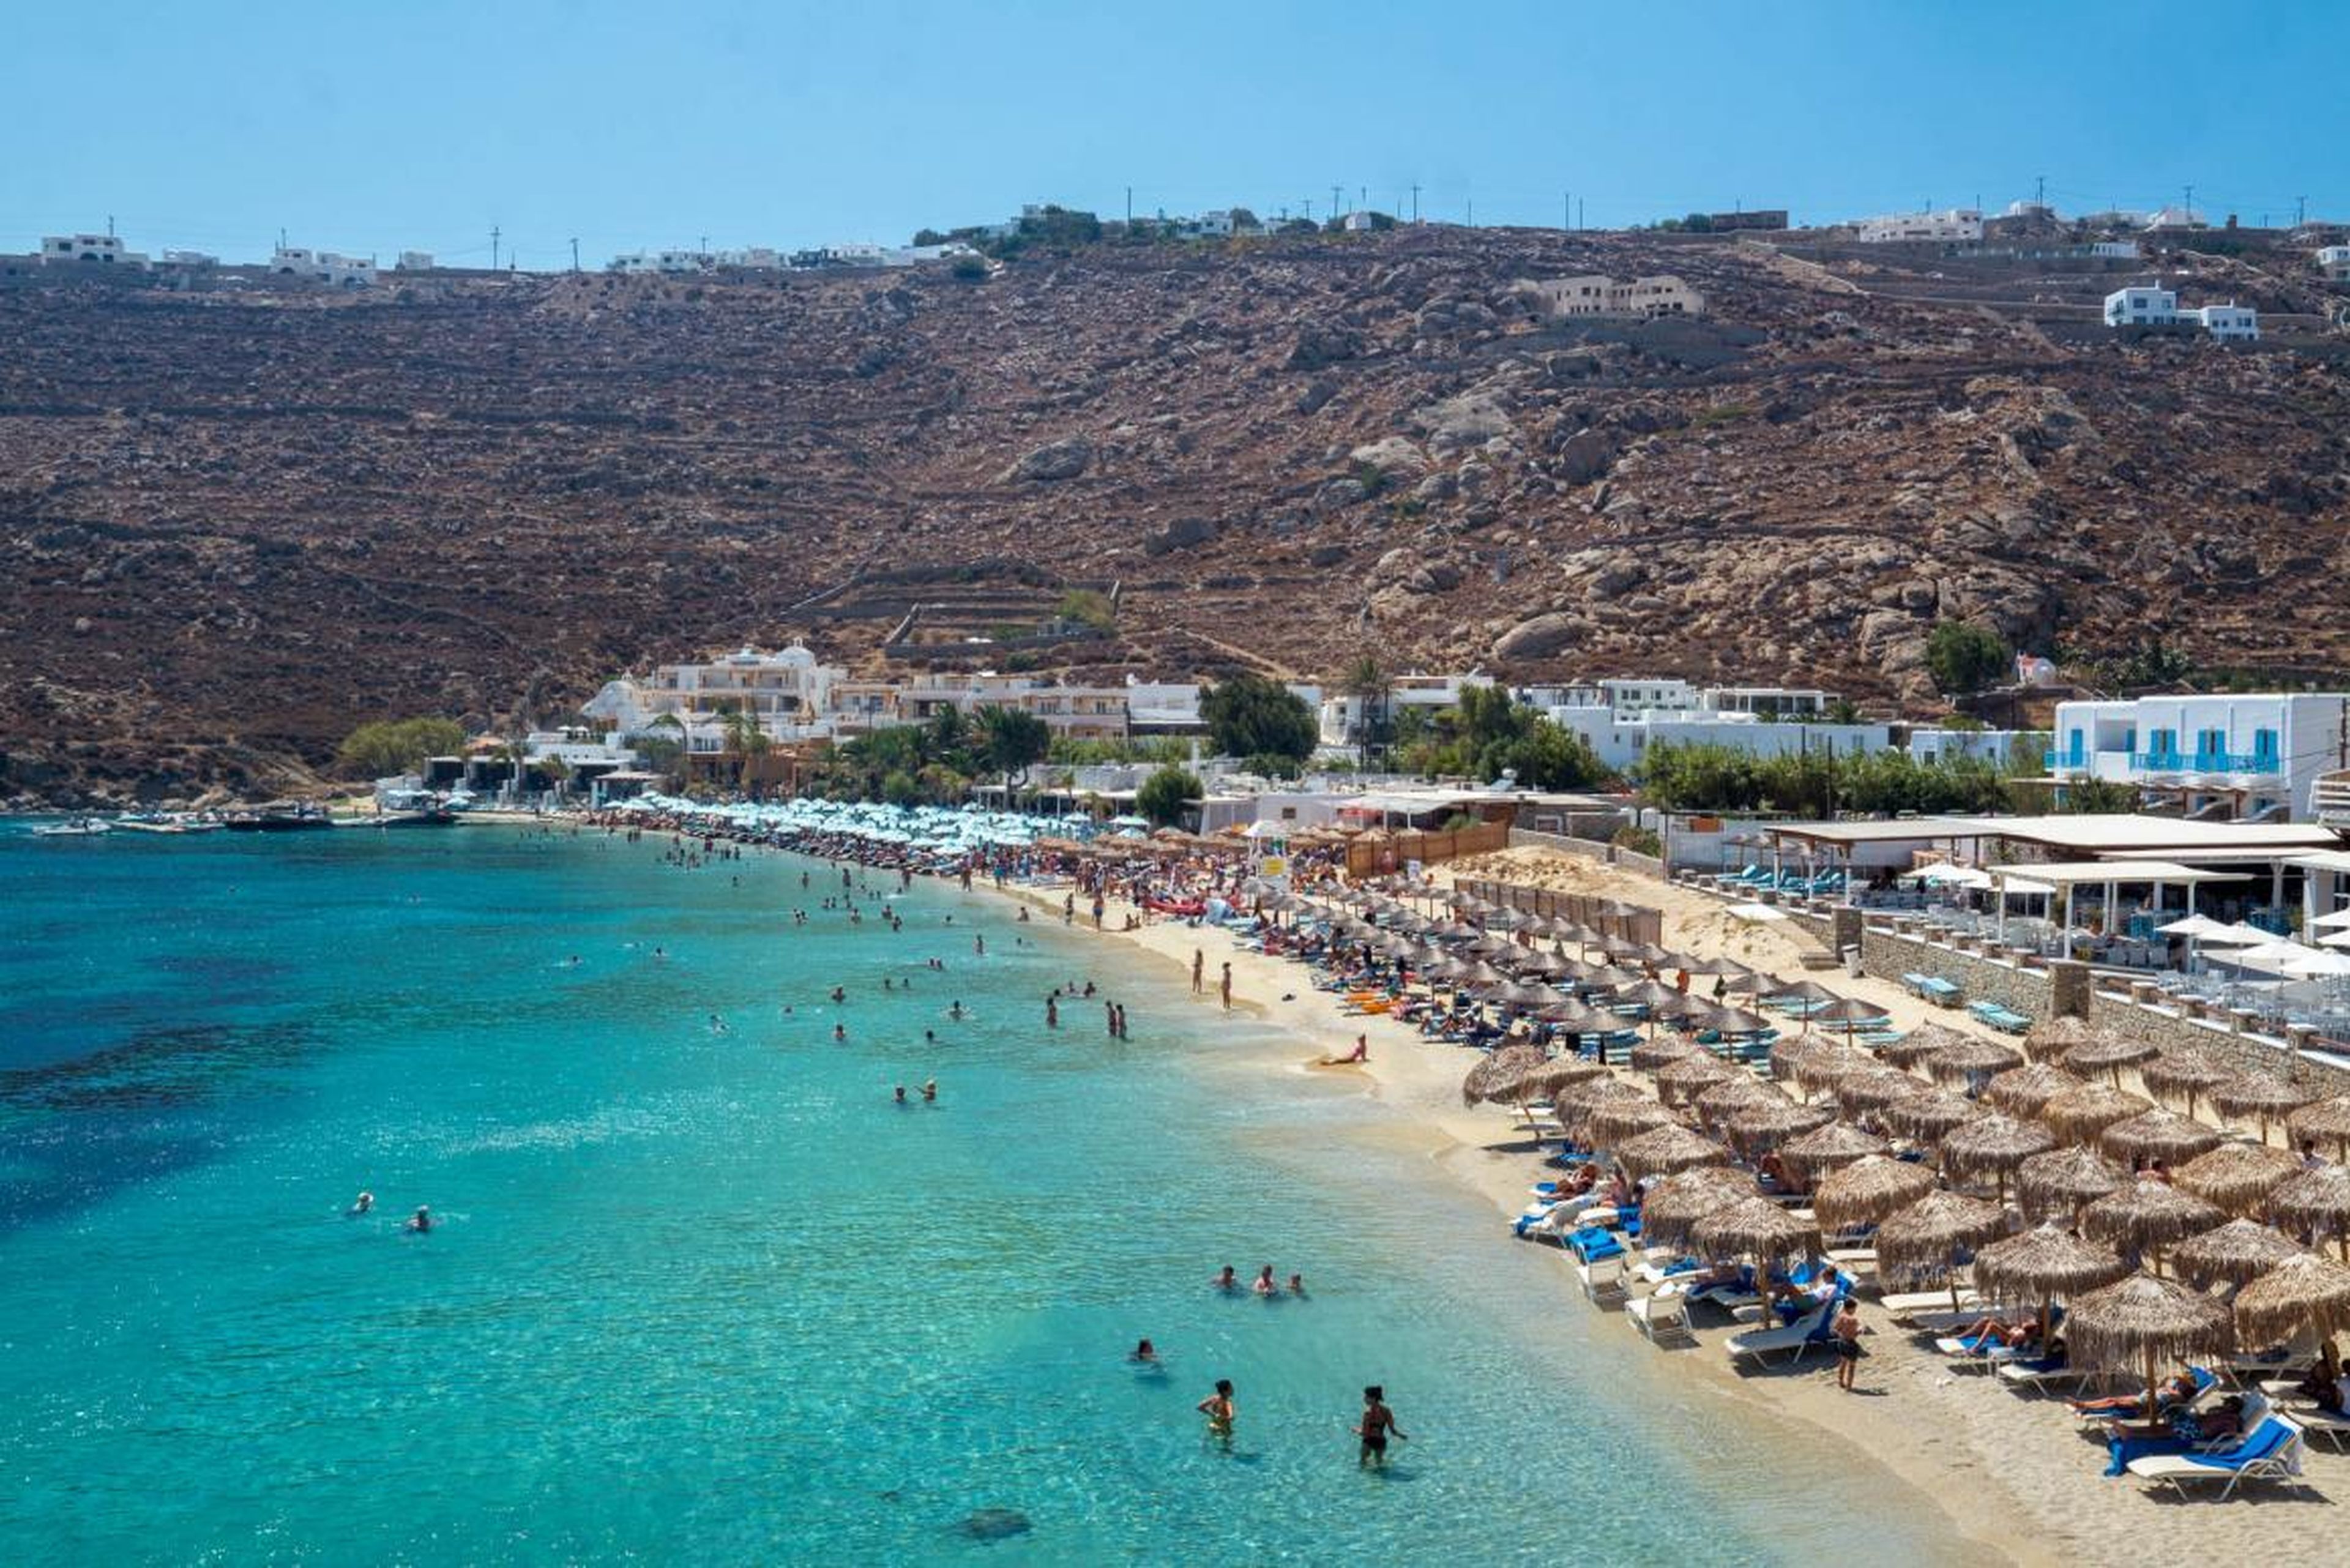 If there's one thing Mykonos had no shortage of, it was gorgeous beaches and calm, blue-green waters. My only knock is that most of the best beaches were dominated by beach clubs.